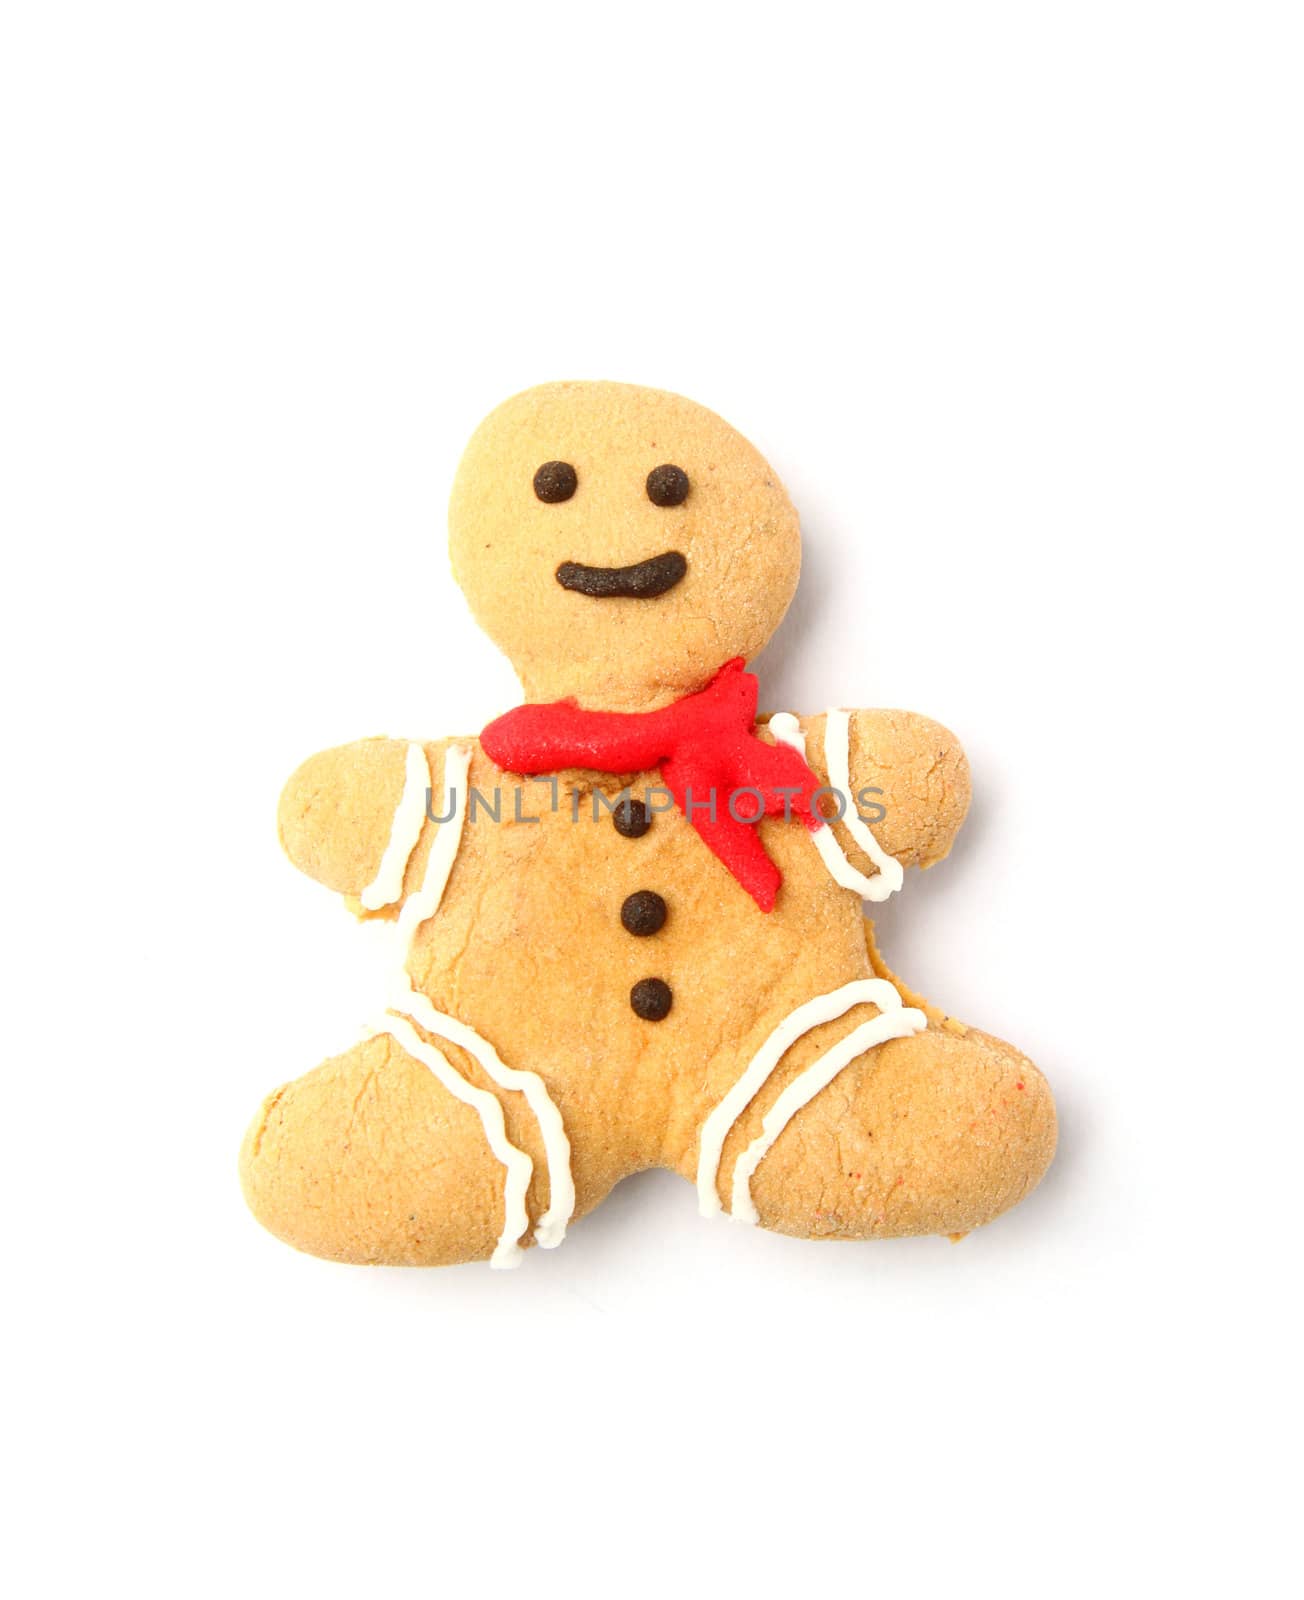 Ginger bread man on white background by nuchylee